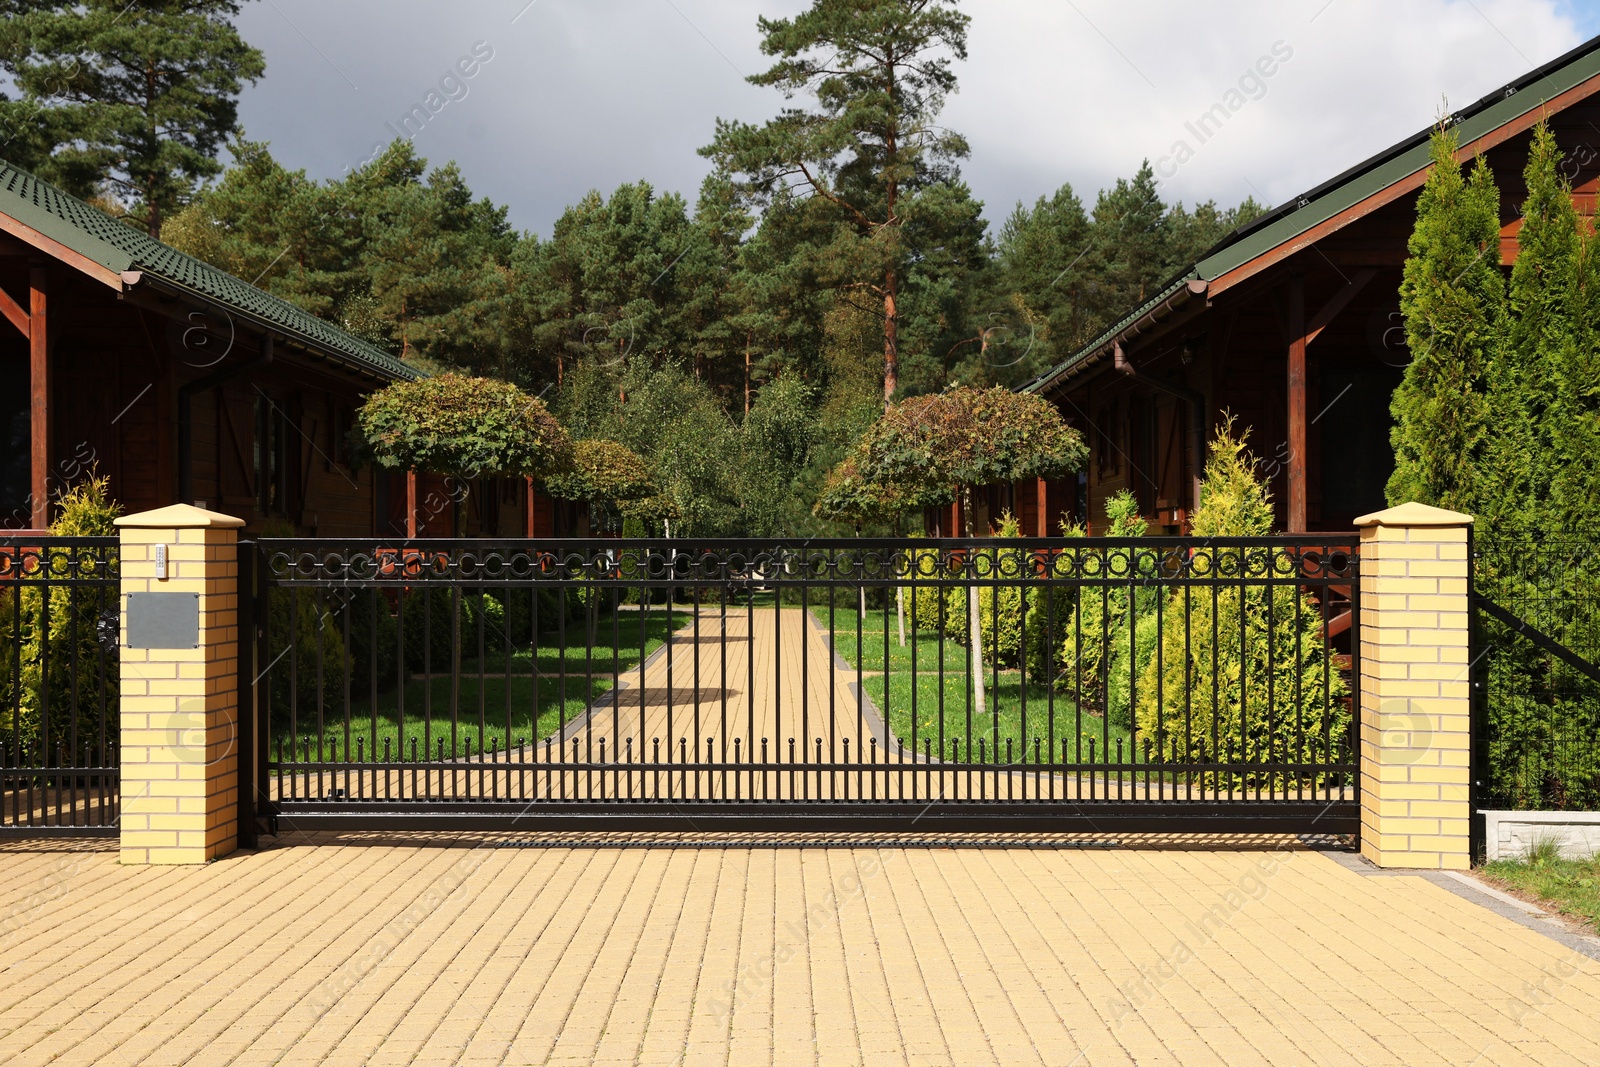 Photo of Closed metal gates near beautiful garden and houses outdoors